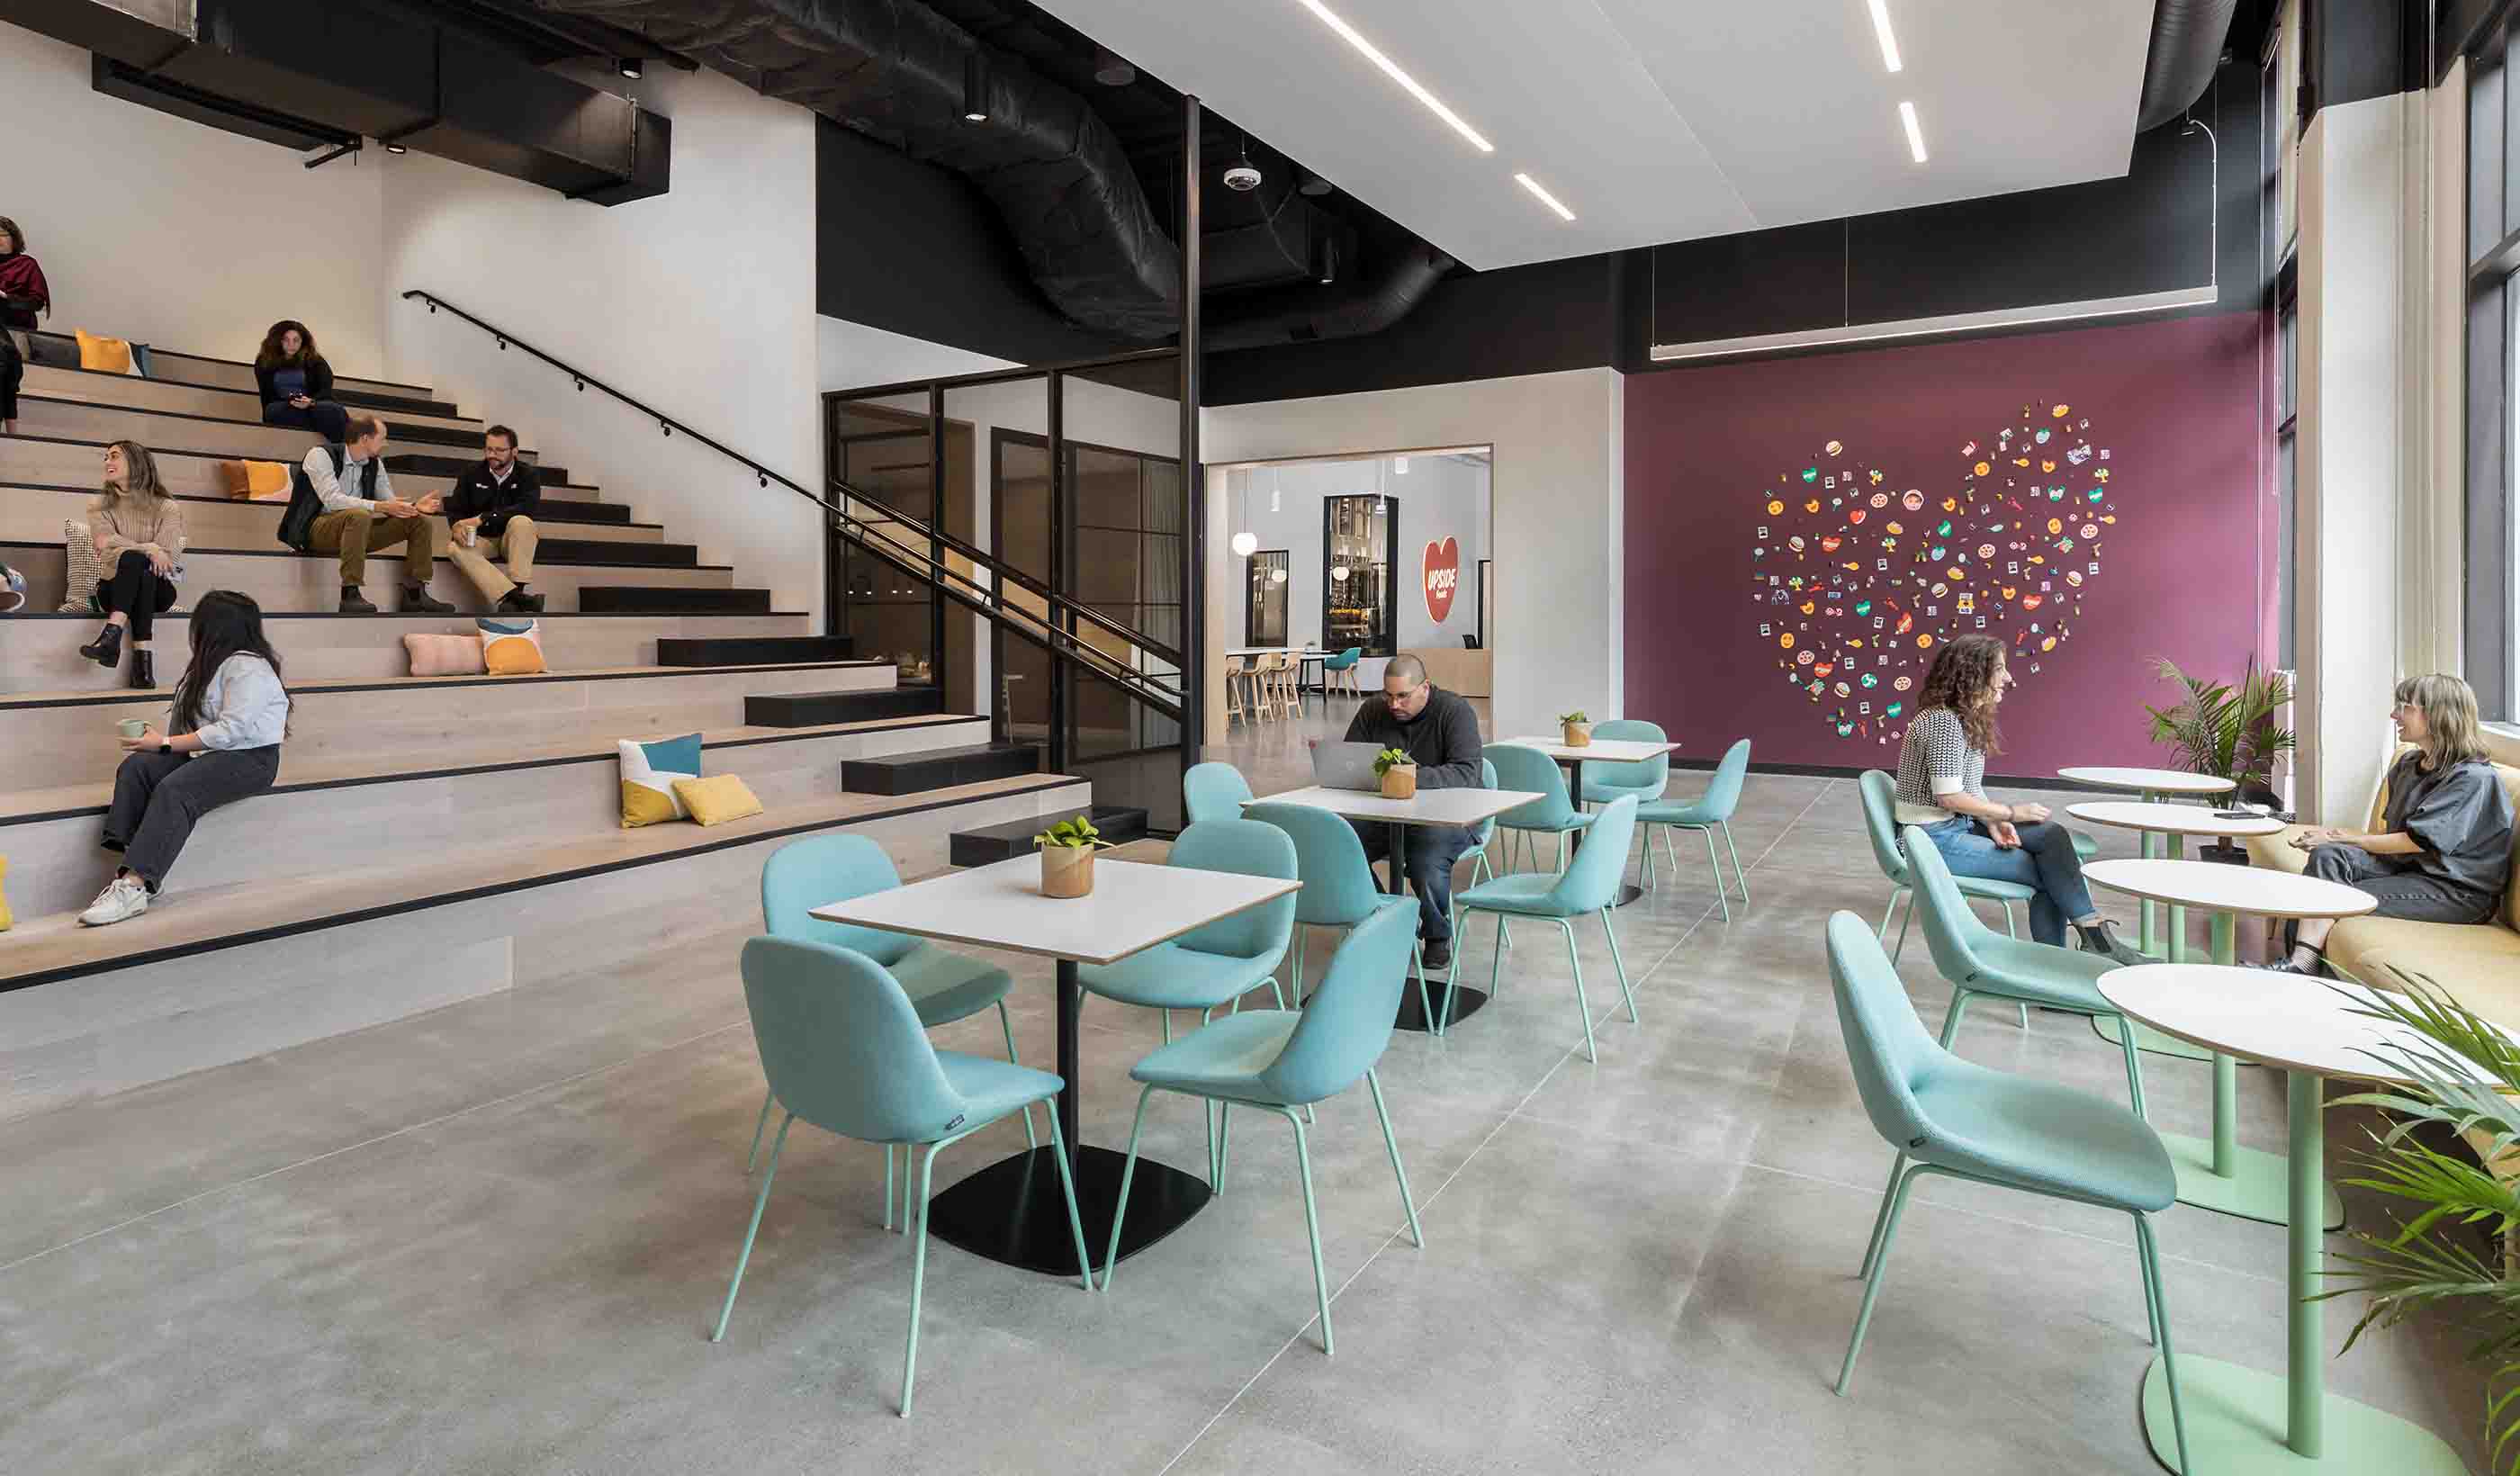 What is an innovation center? A collaborative workspace that’s essential in today’s office